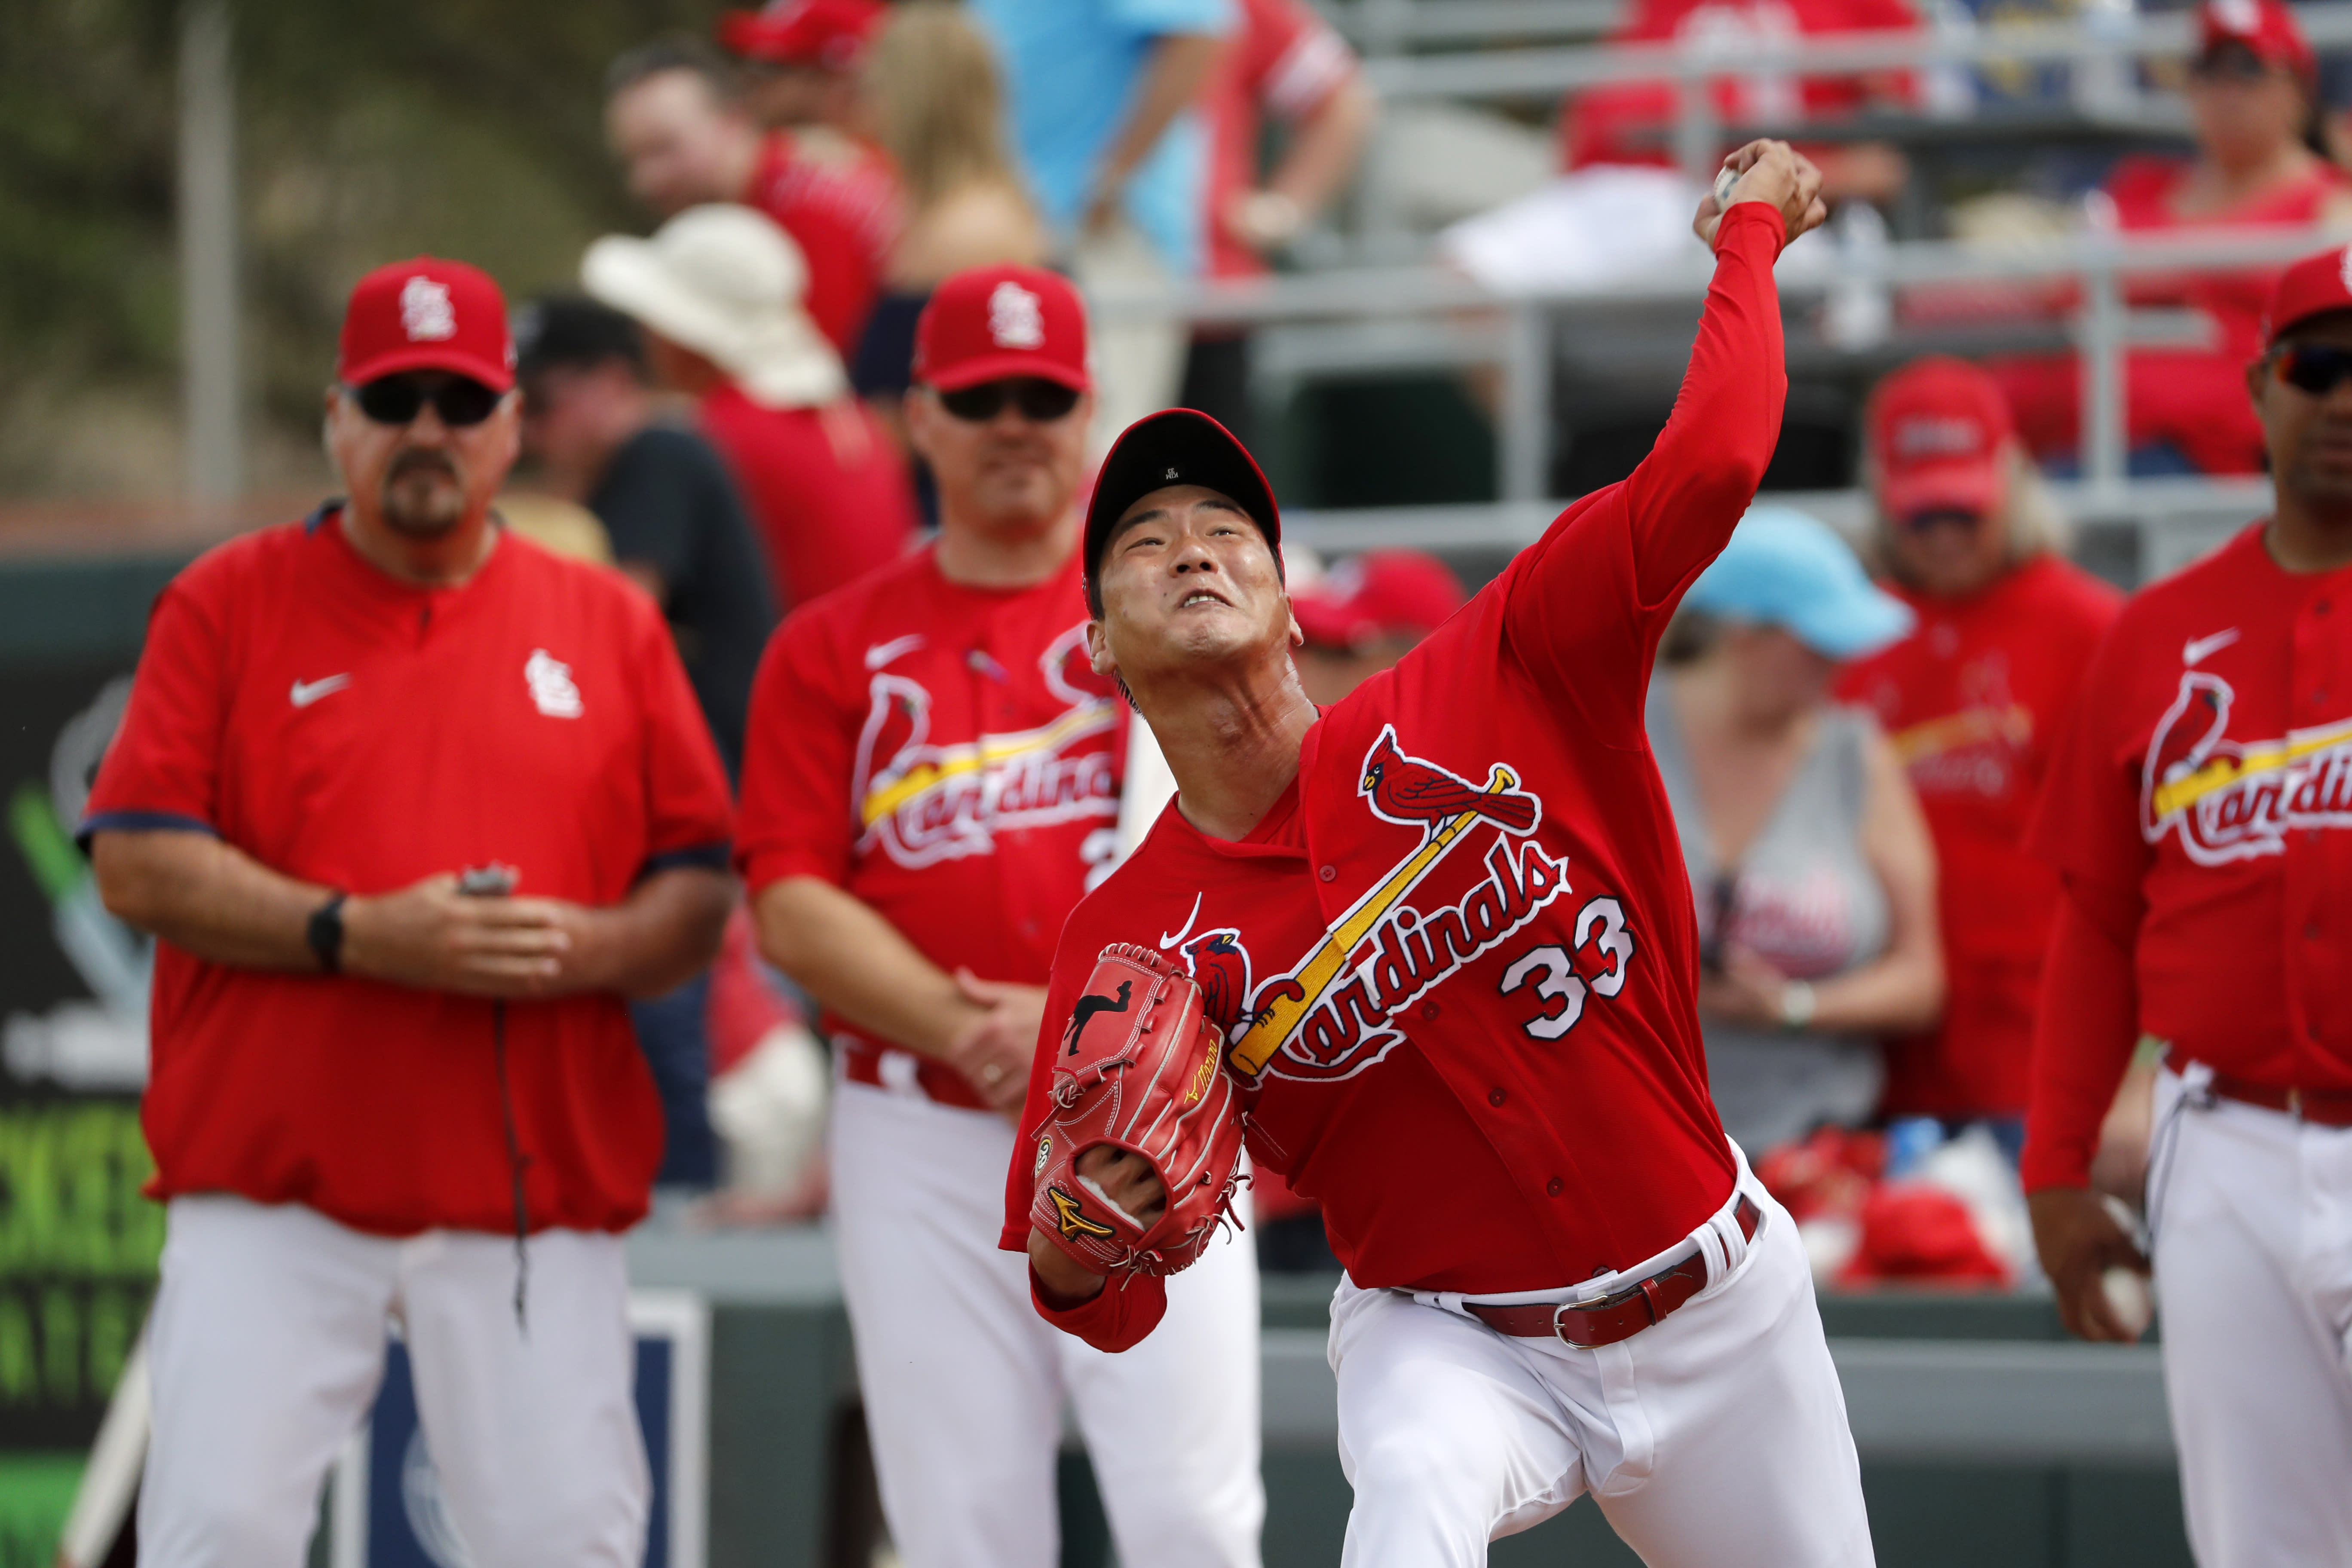 Kim works two perfect innings in debut as Cardinals starter